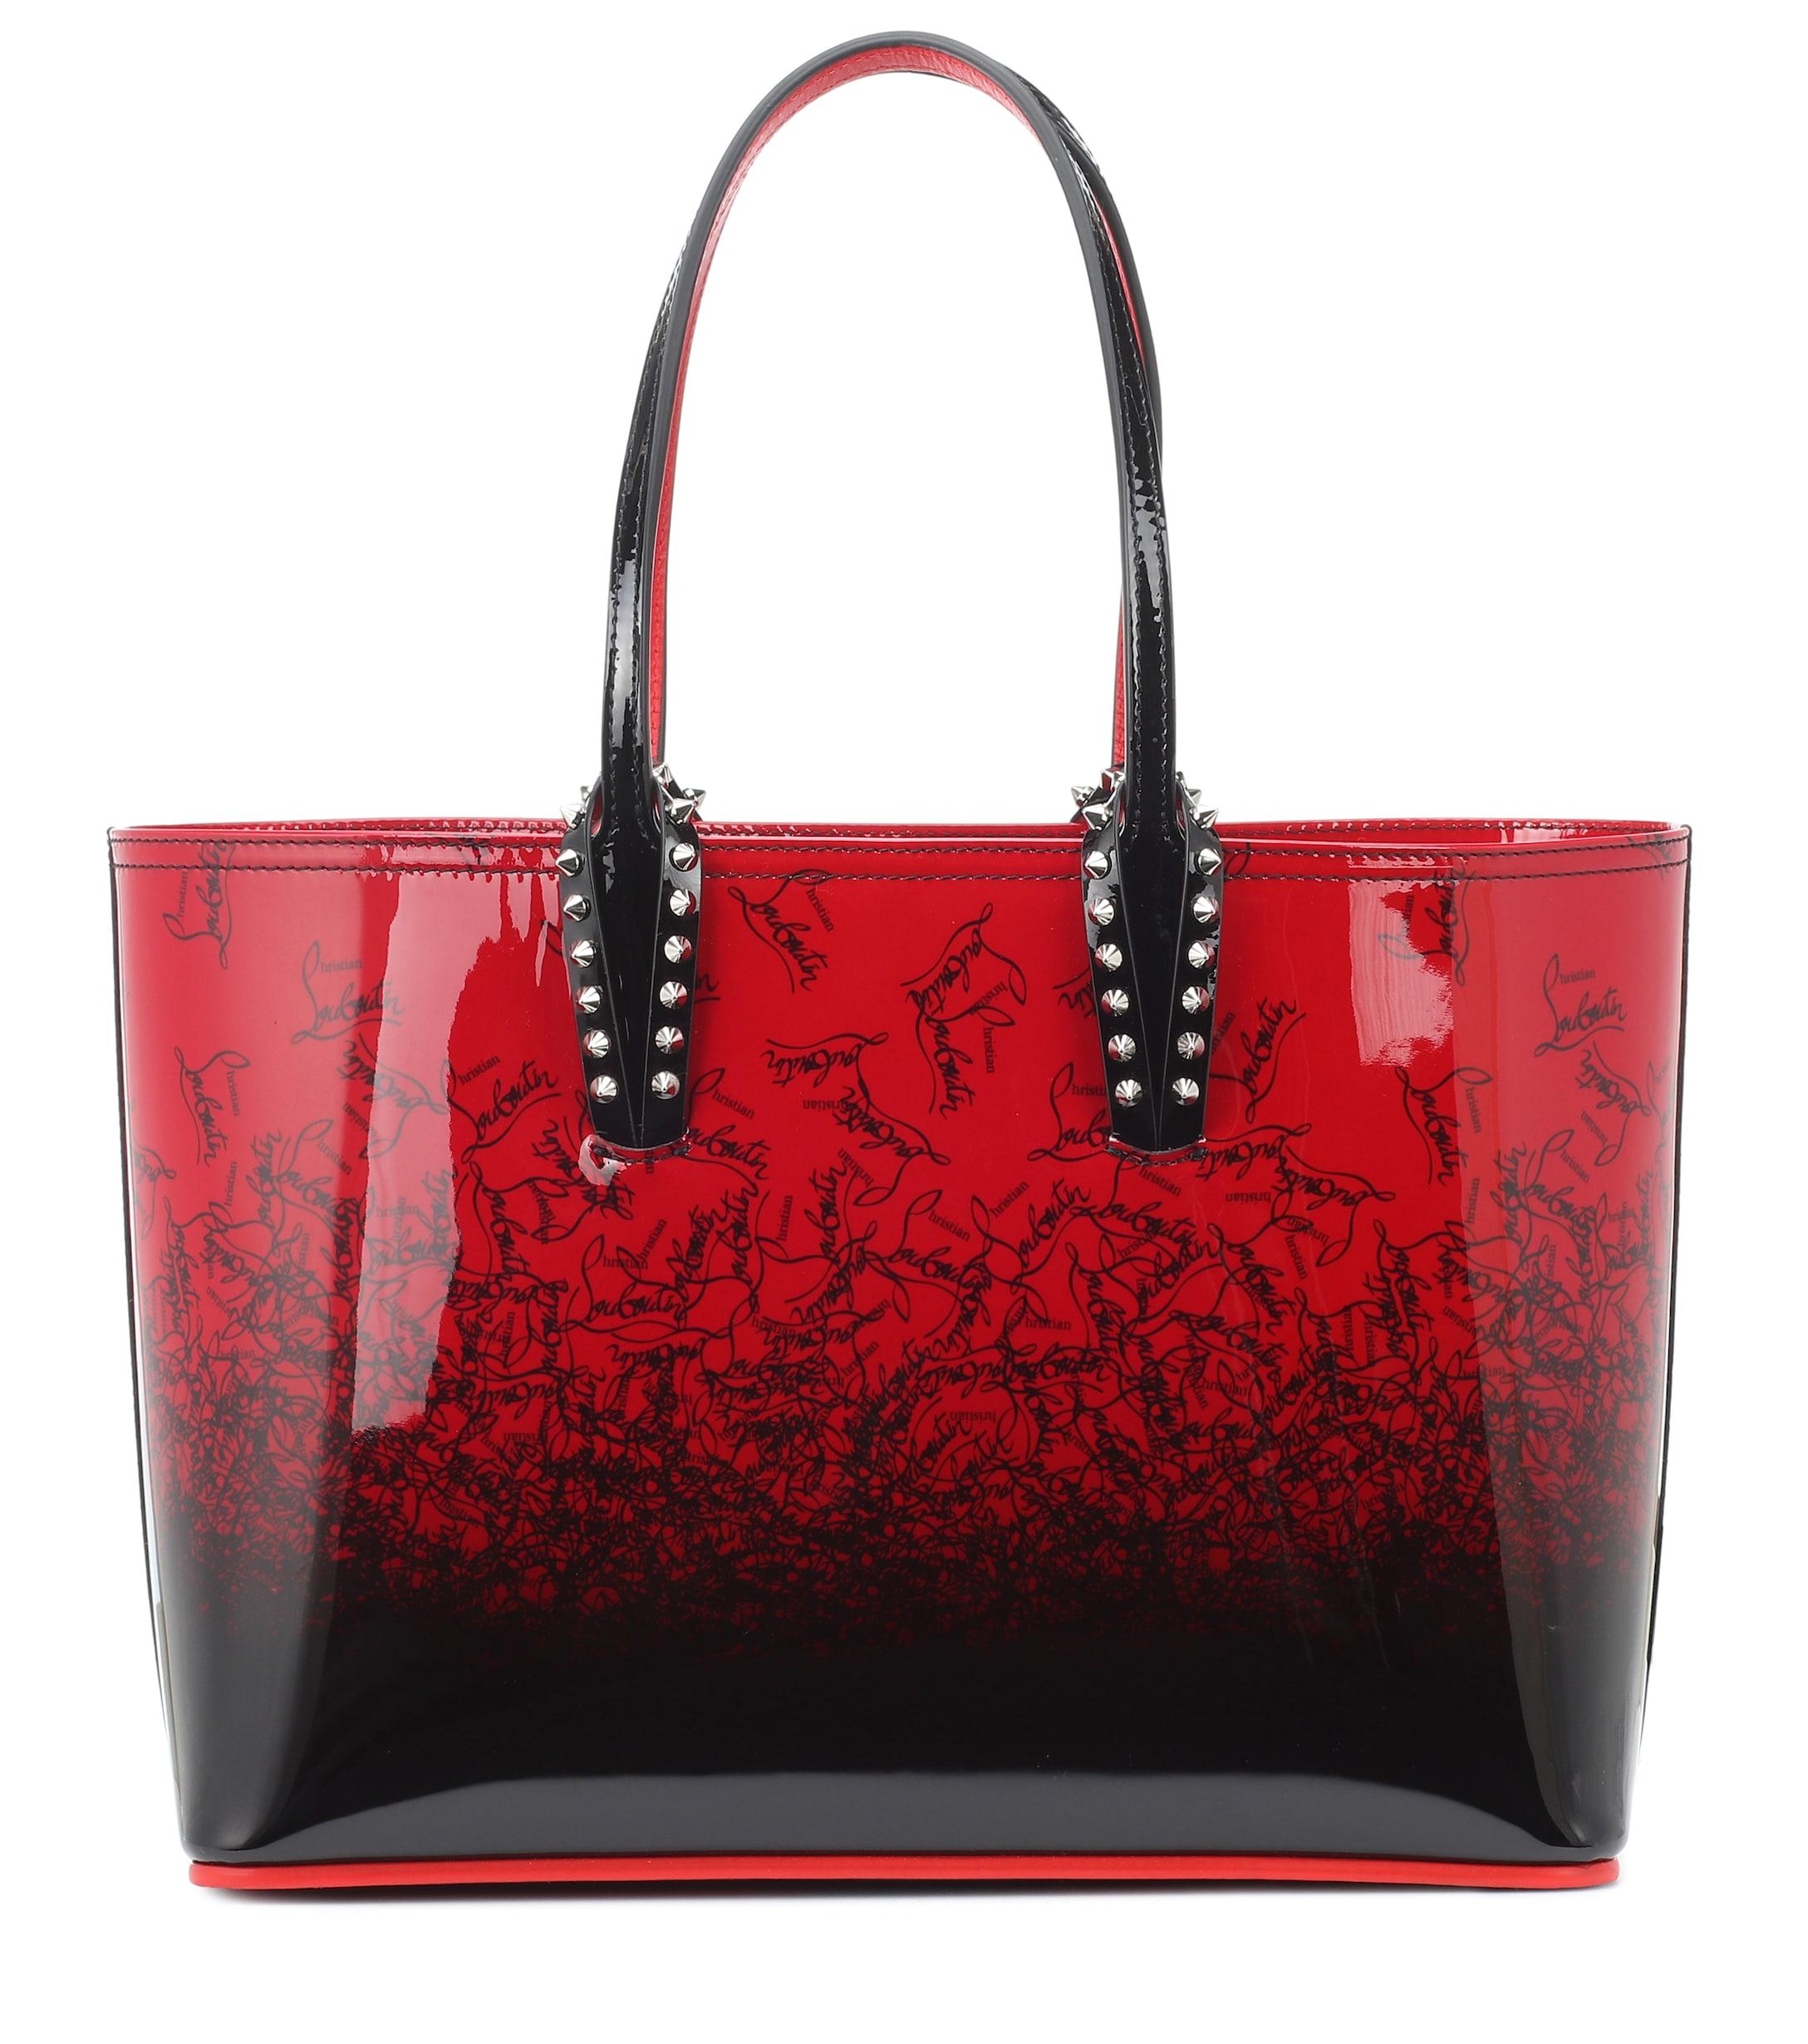 Lyst - Christian Louboutin Cabata Small Patent Leather Tote in Red